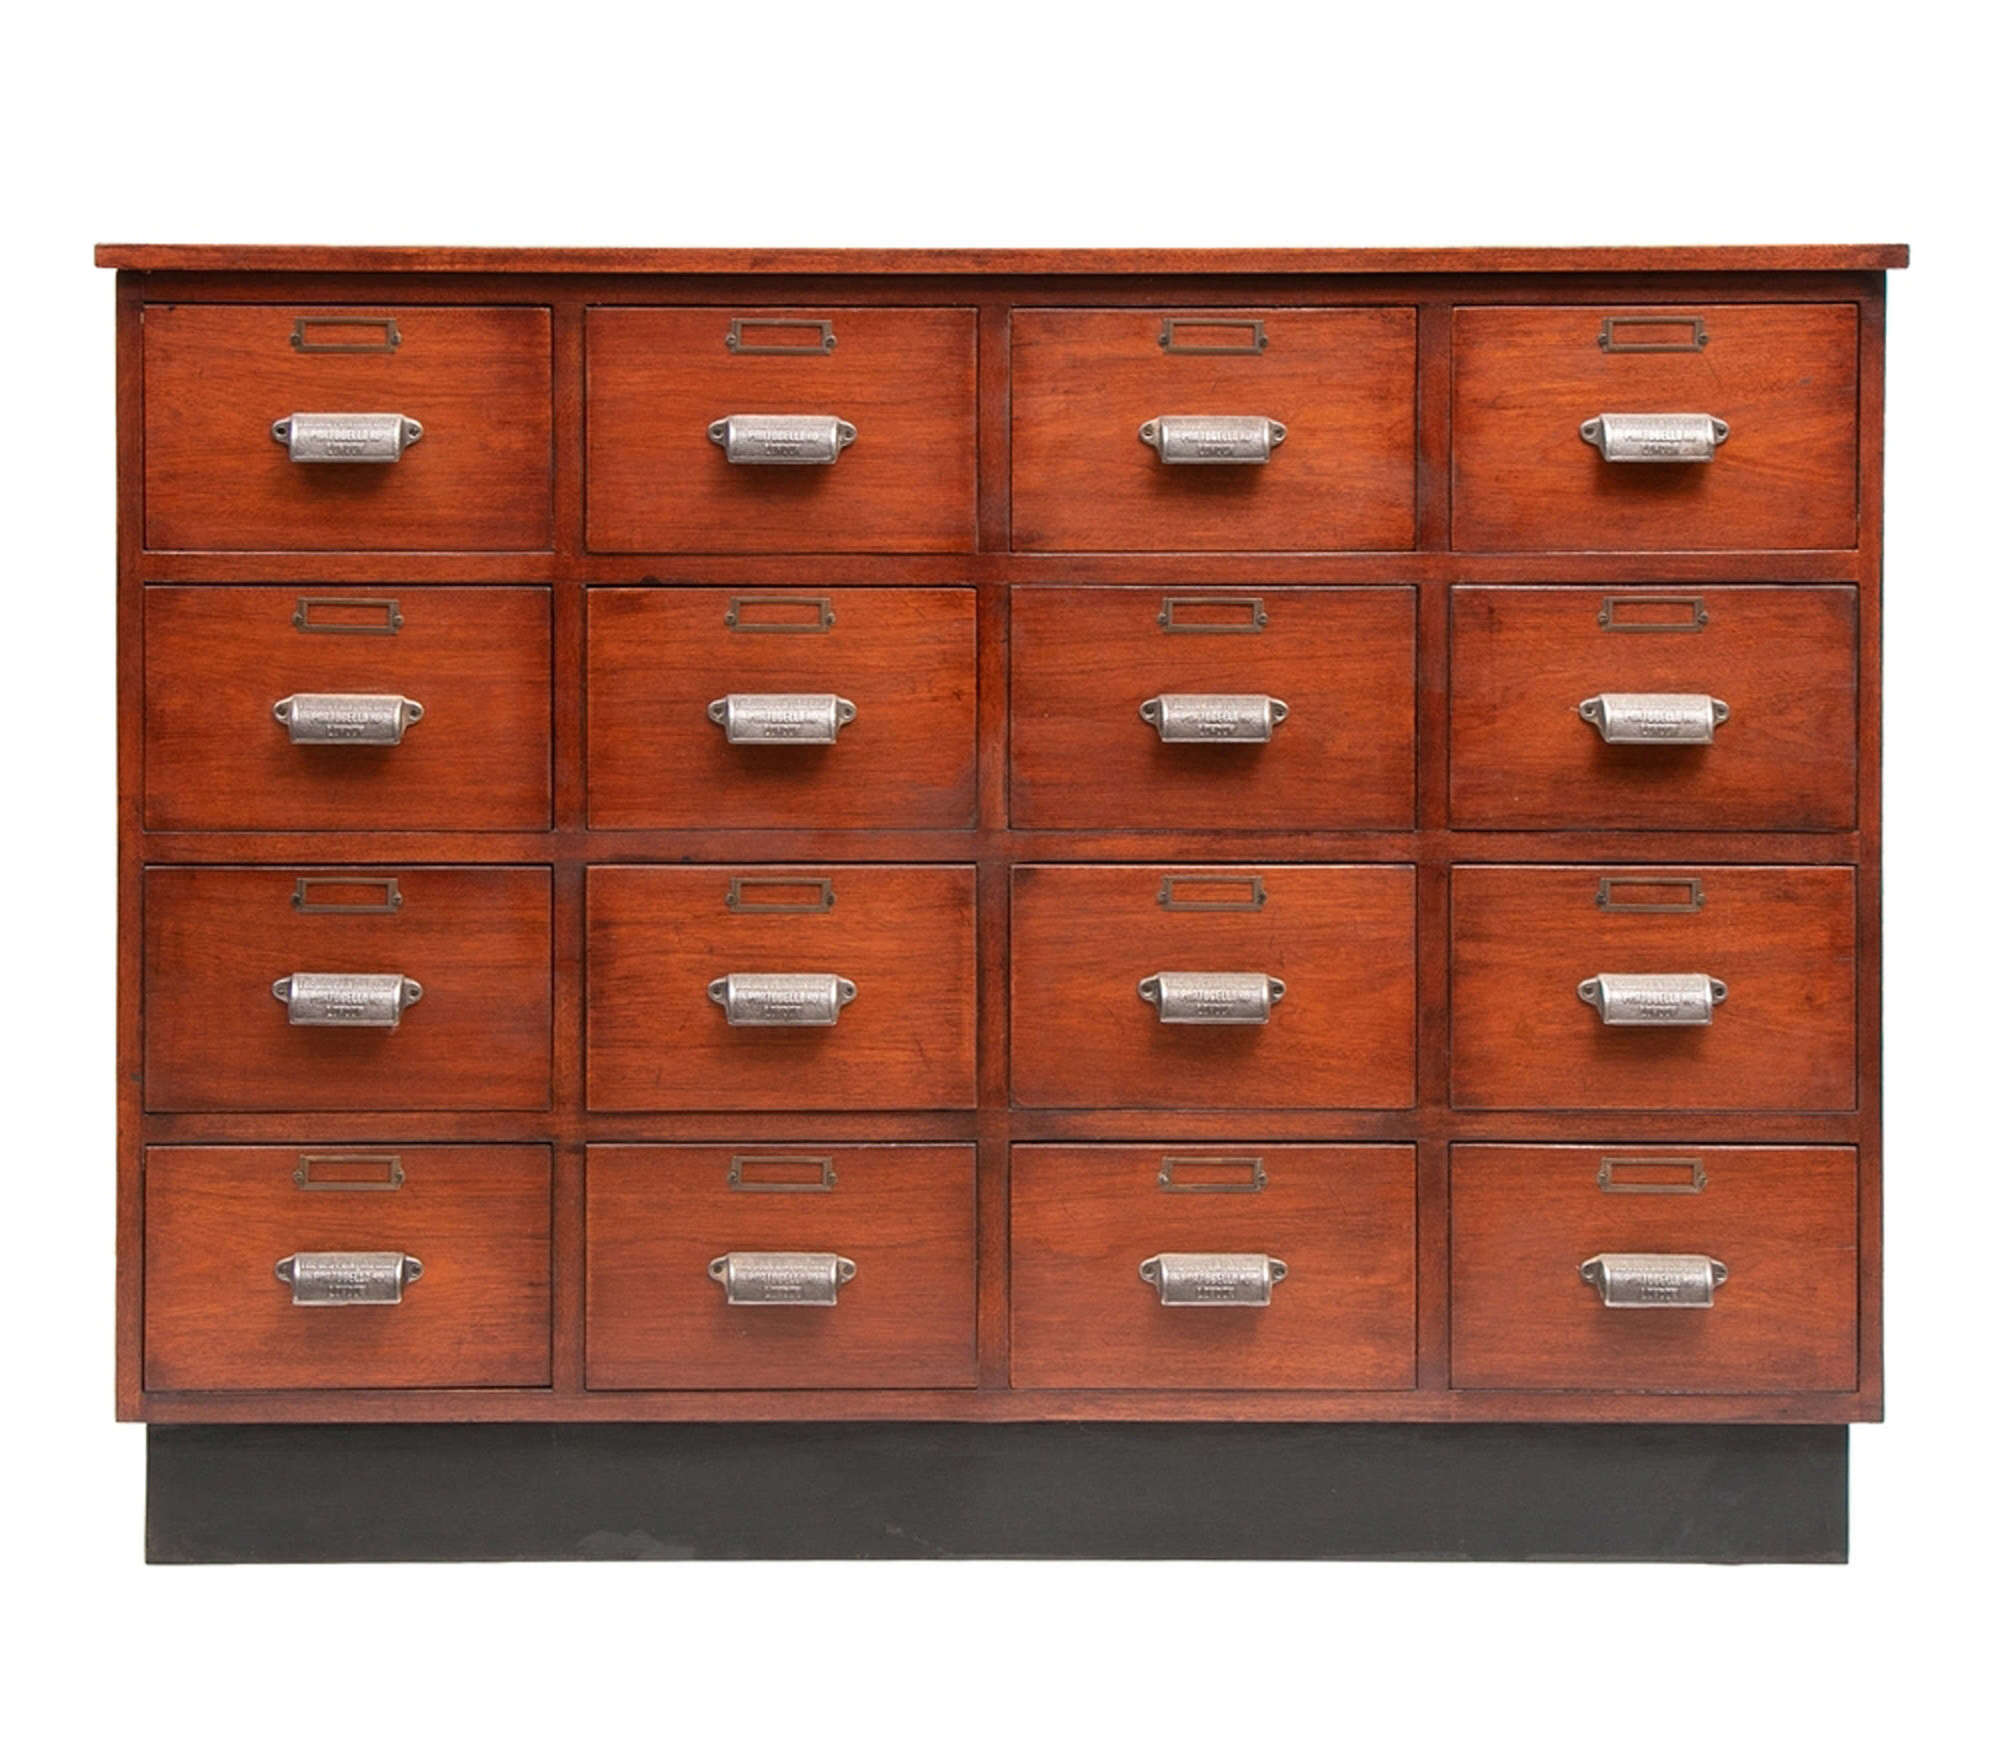 A contemporary bank of drawers made in mahogany